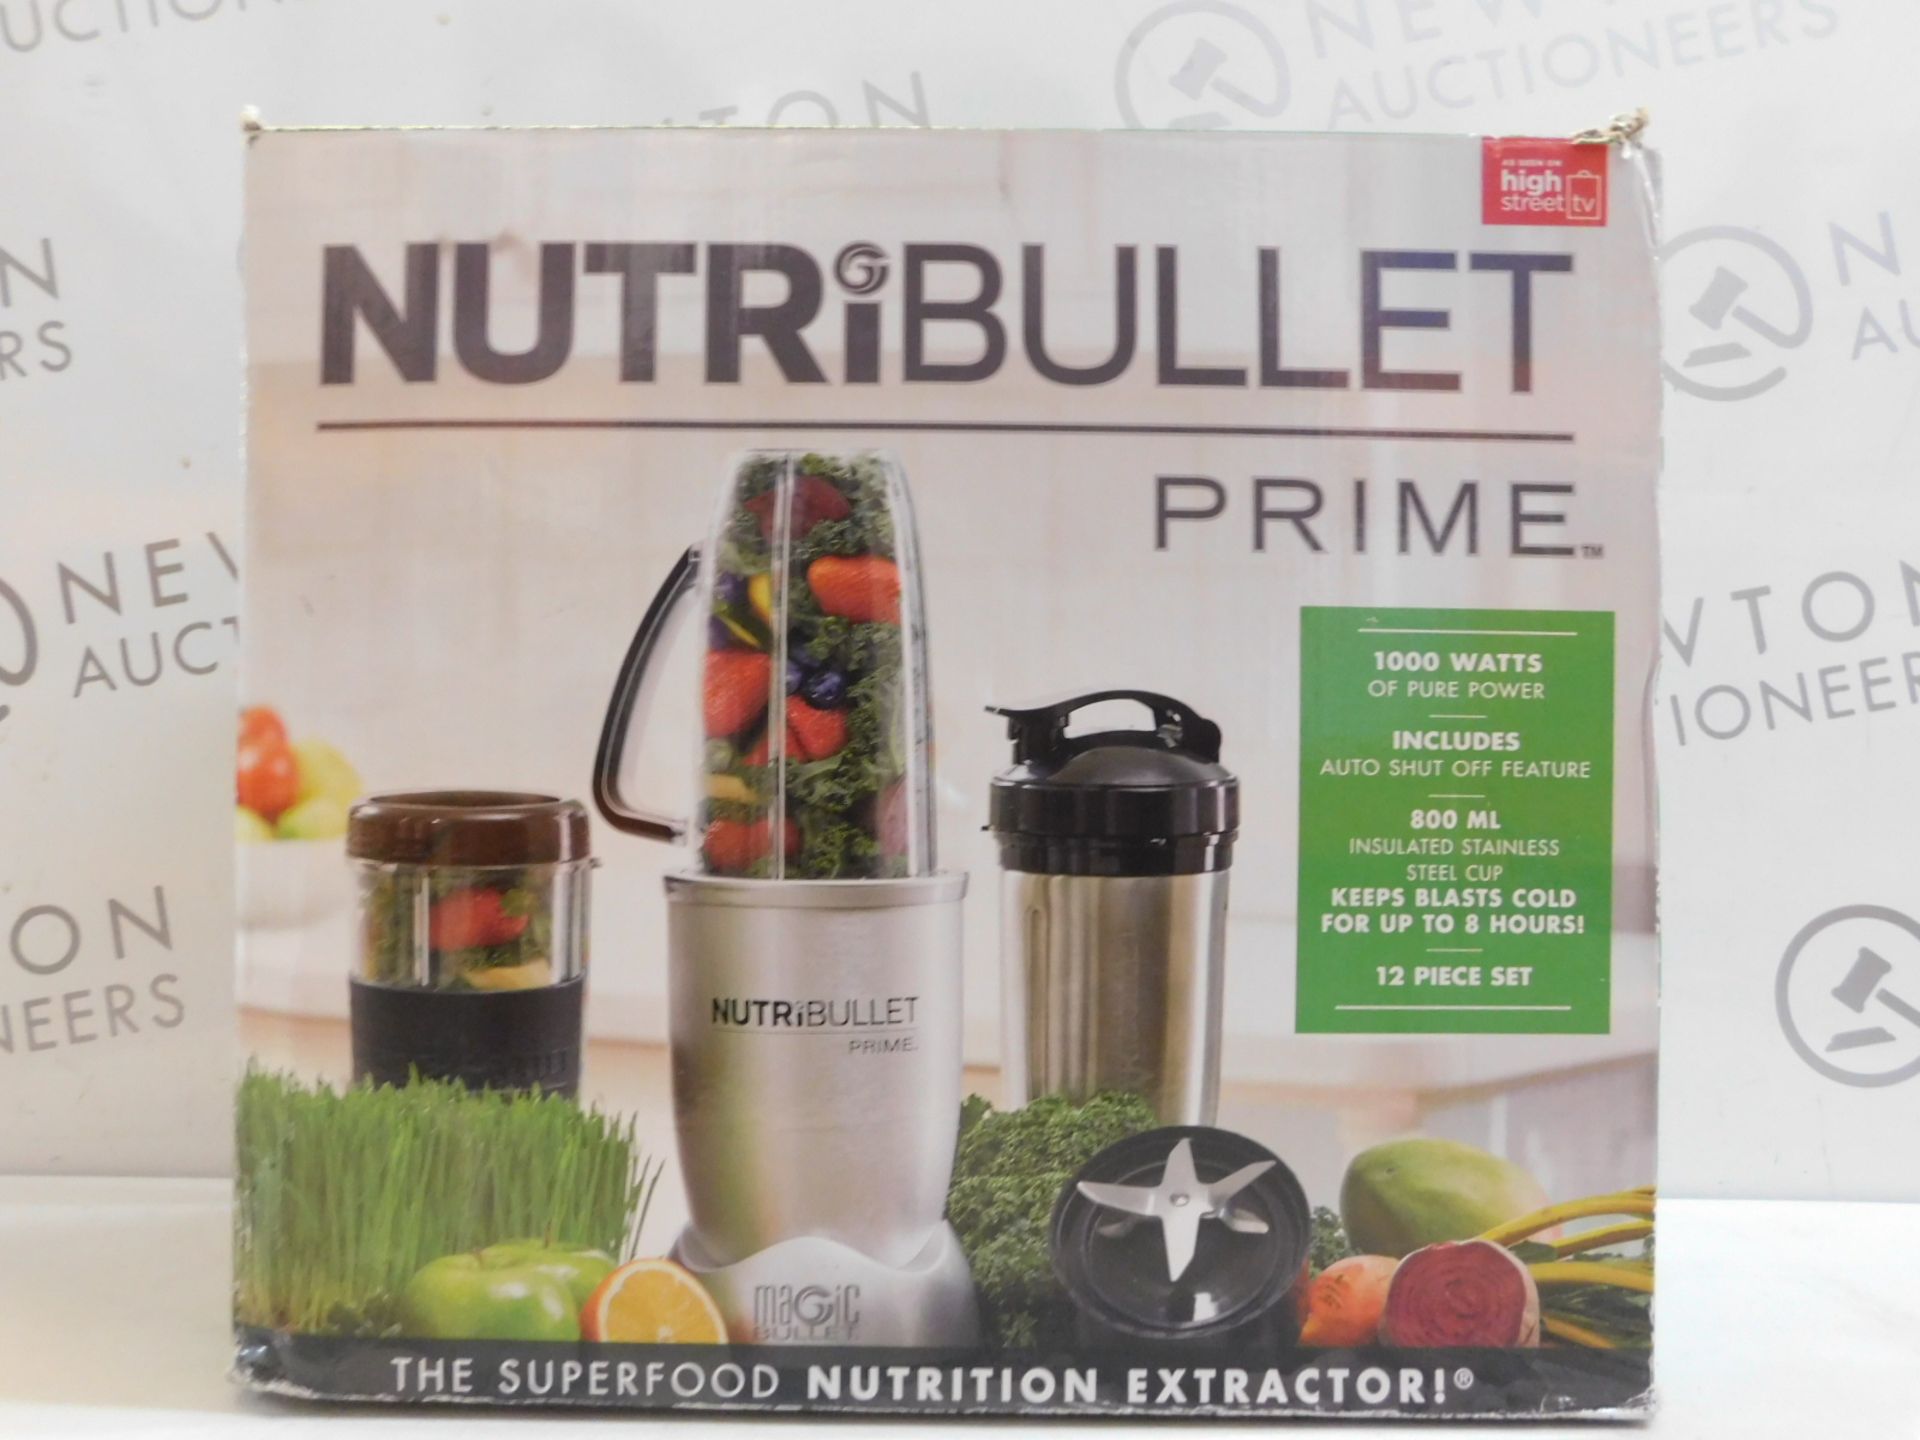 1 BOXED MAGIC BULLET NUTRIBULLET PRIME BLENDER/ MIXER WITH ACCESSORIES RRP Â£129.99